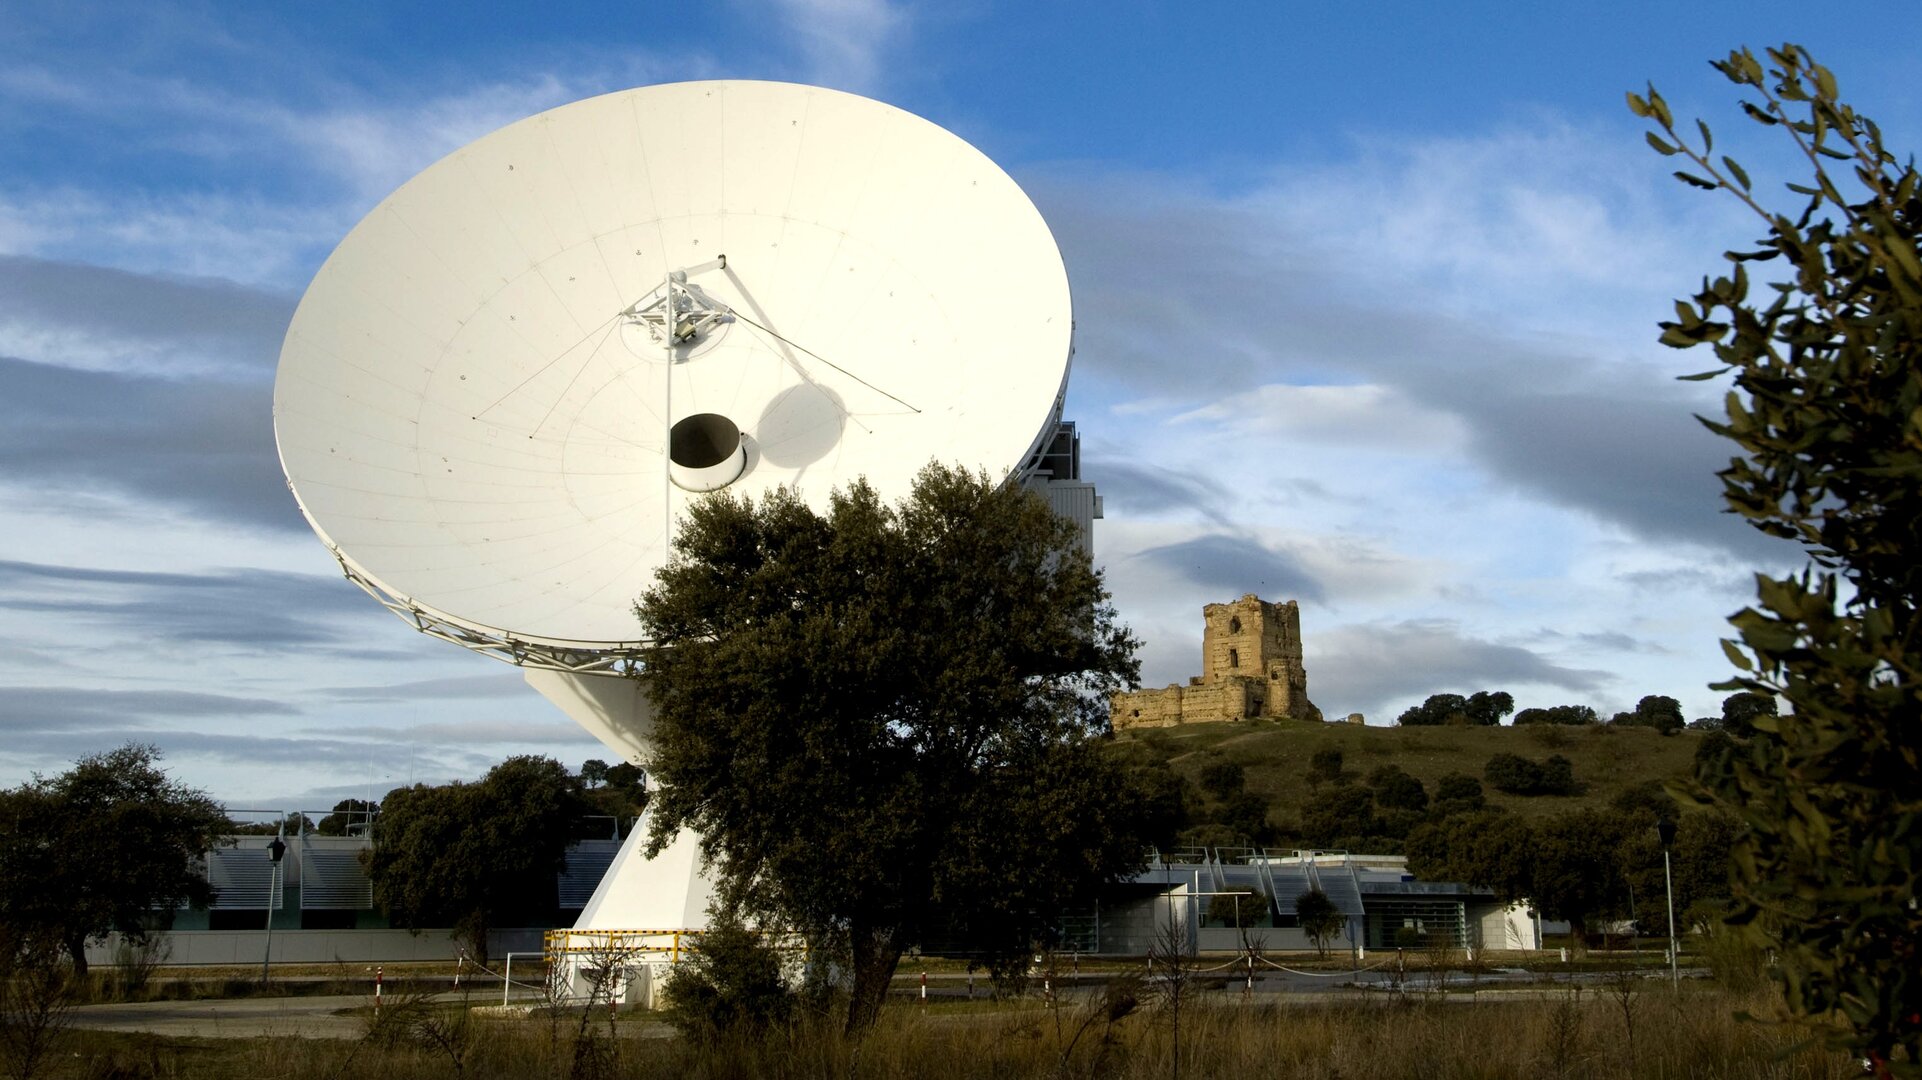 Villafranca station is located at the European Space Astronomy Centre (ESAC)